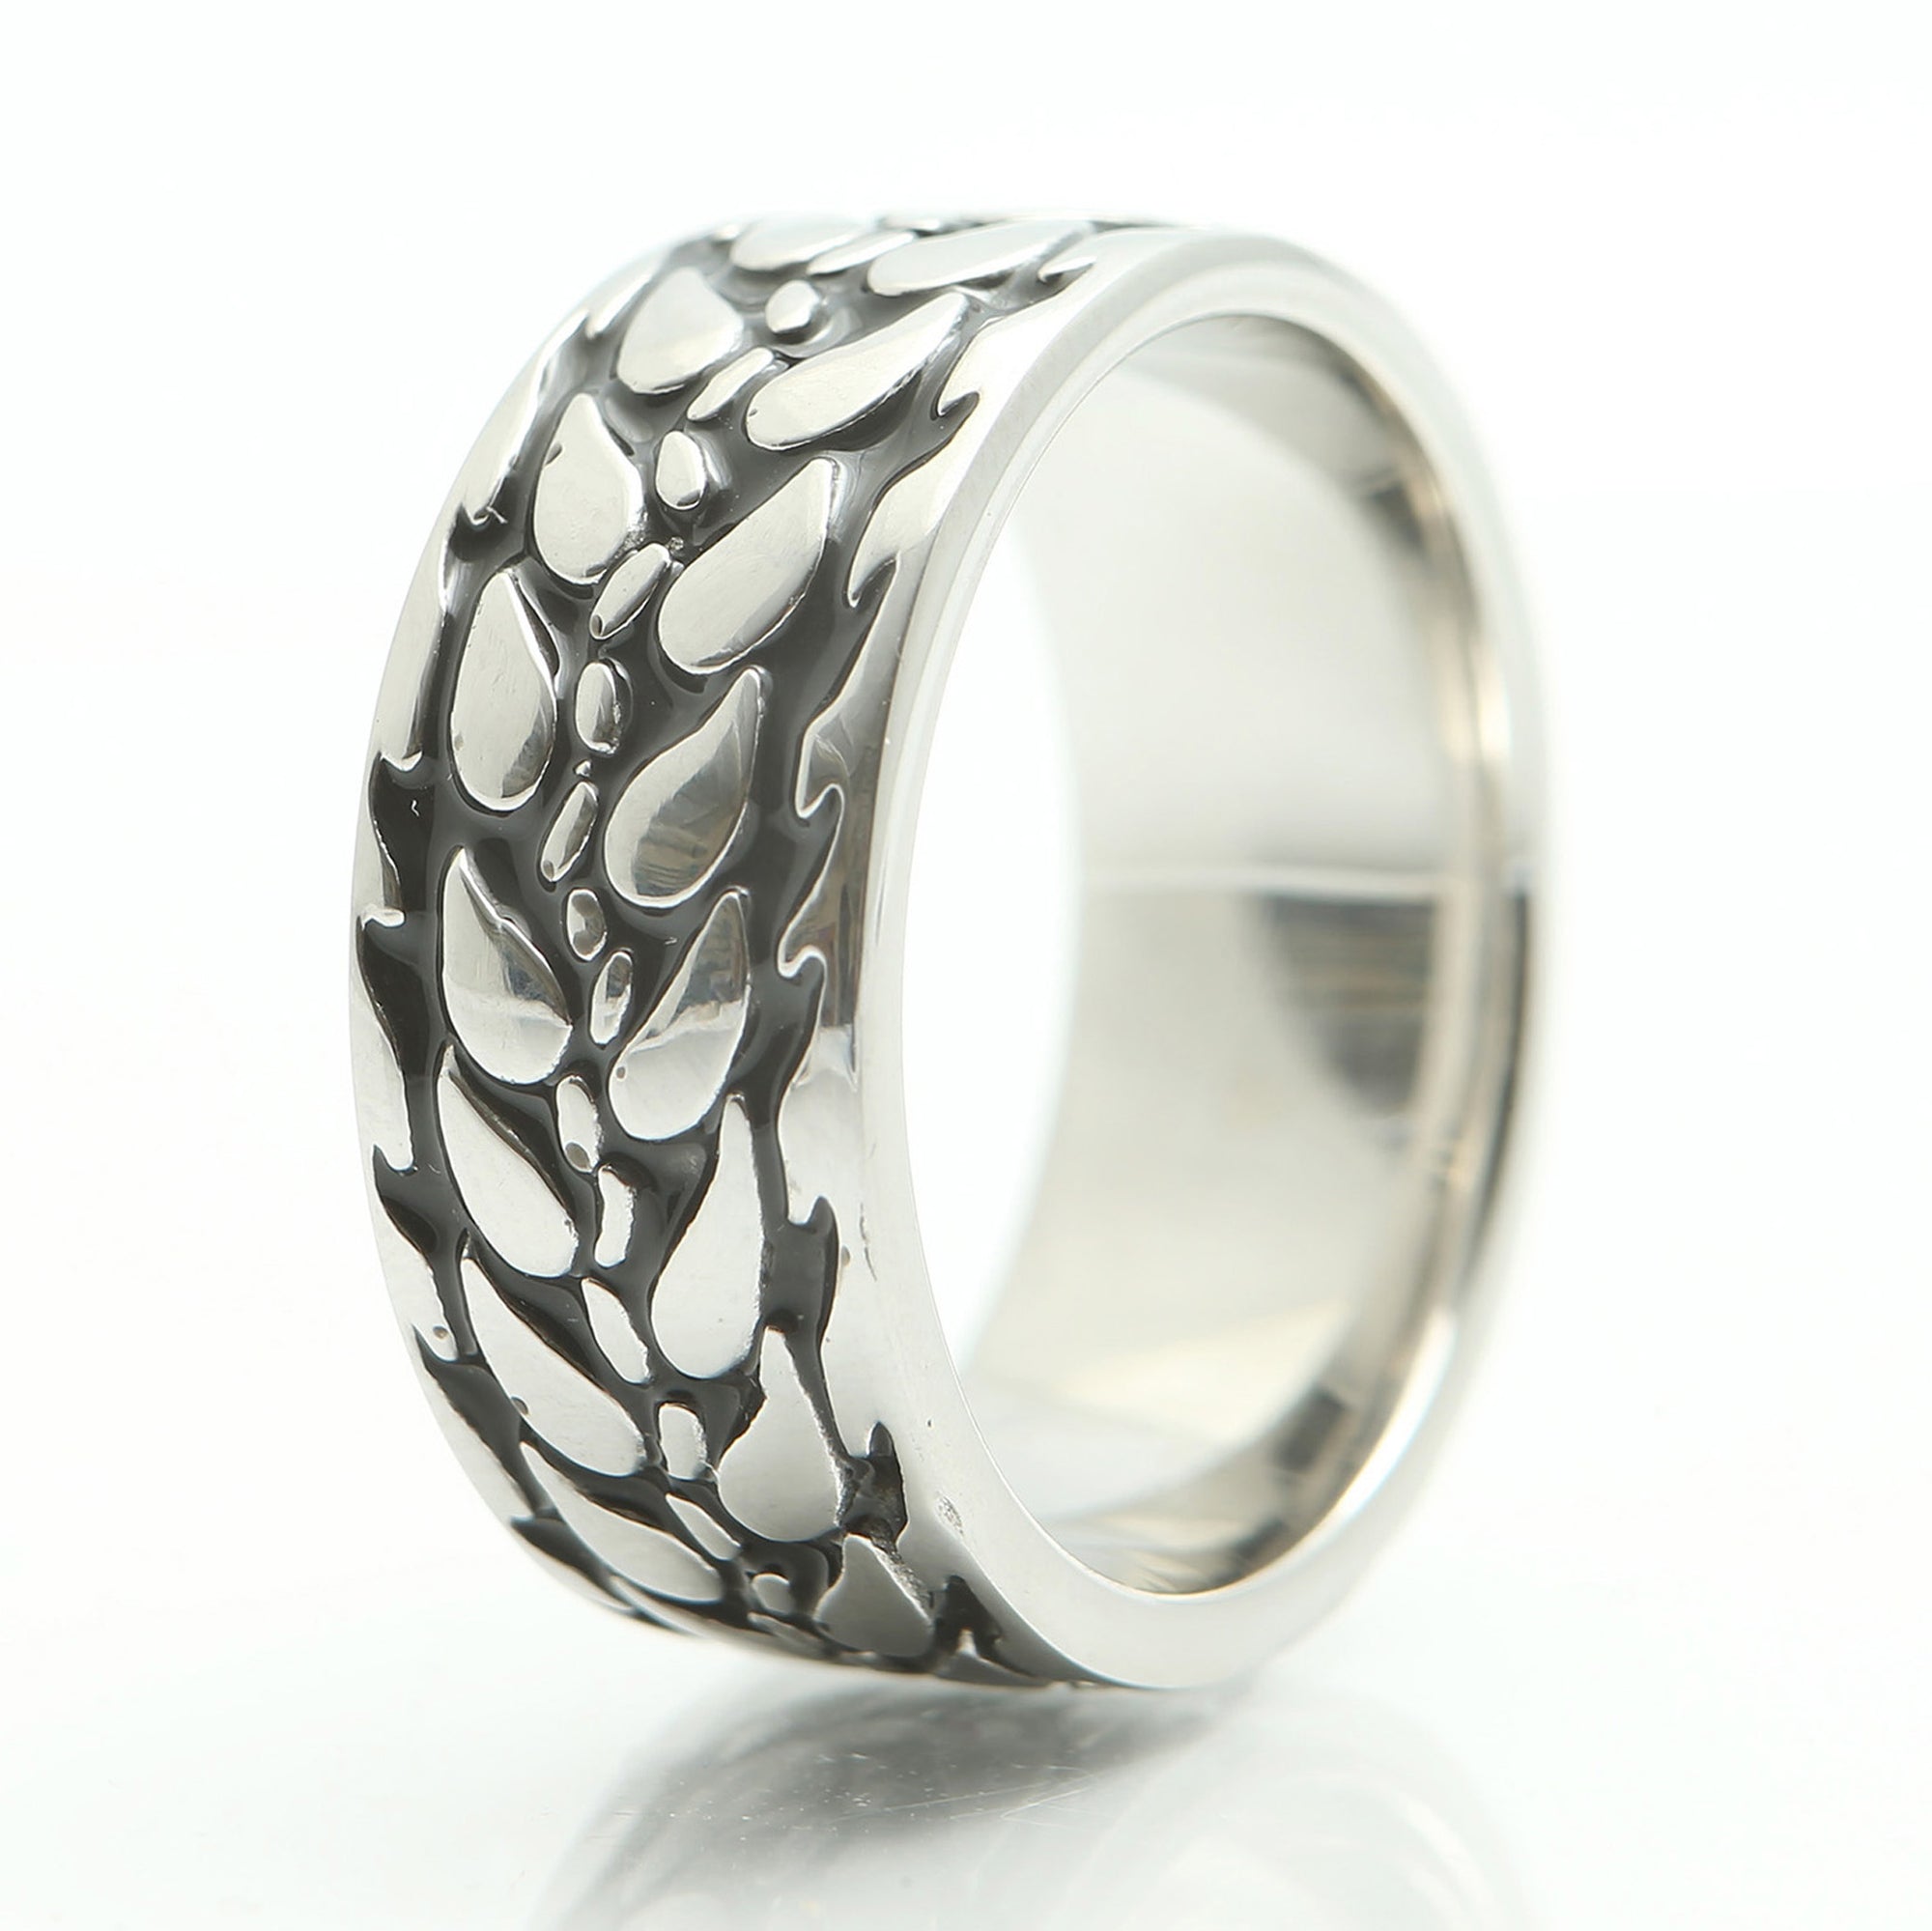 Barley Ring in Wide Stainless Steel